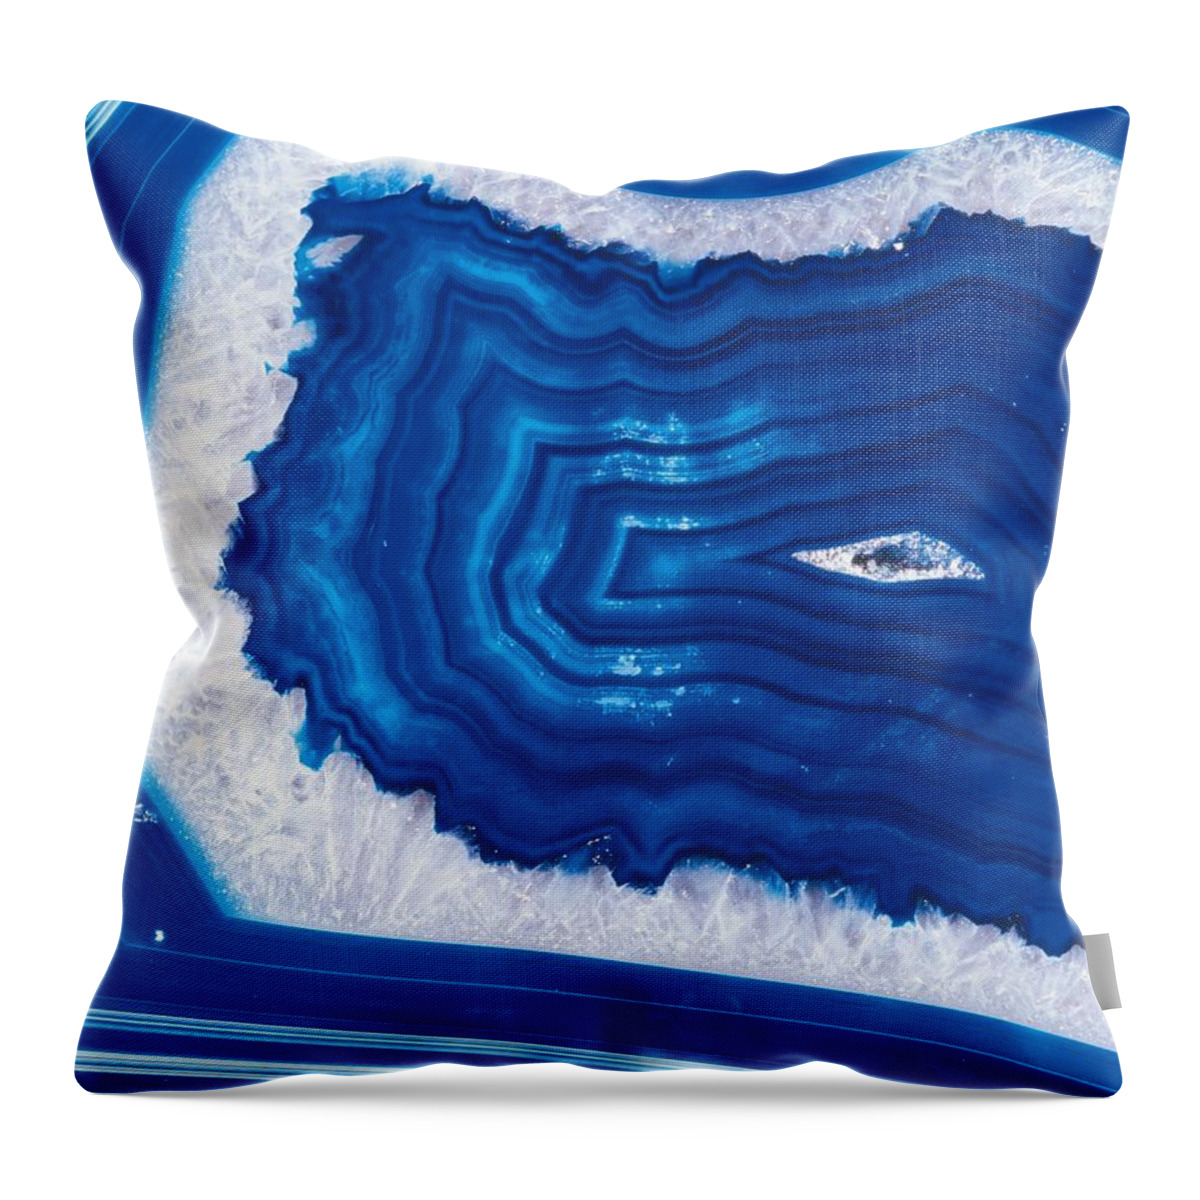 Precious Gem Throw Pillow featuring the photograph Photography Of Agate, Stone Material #1 by Daj